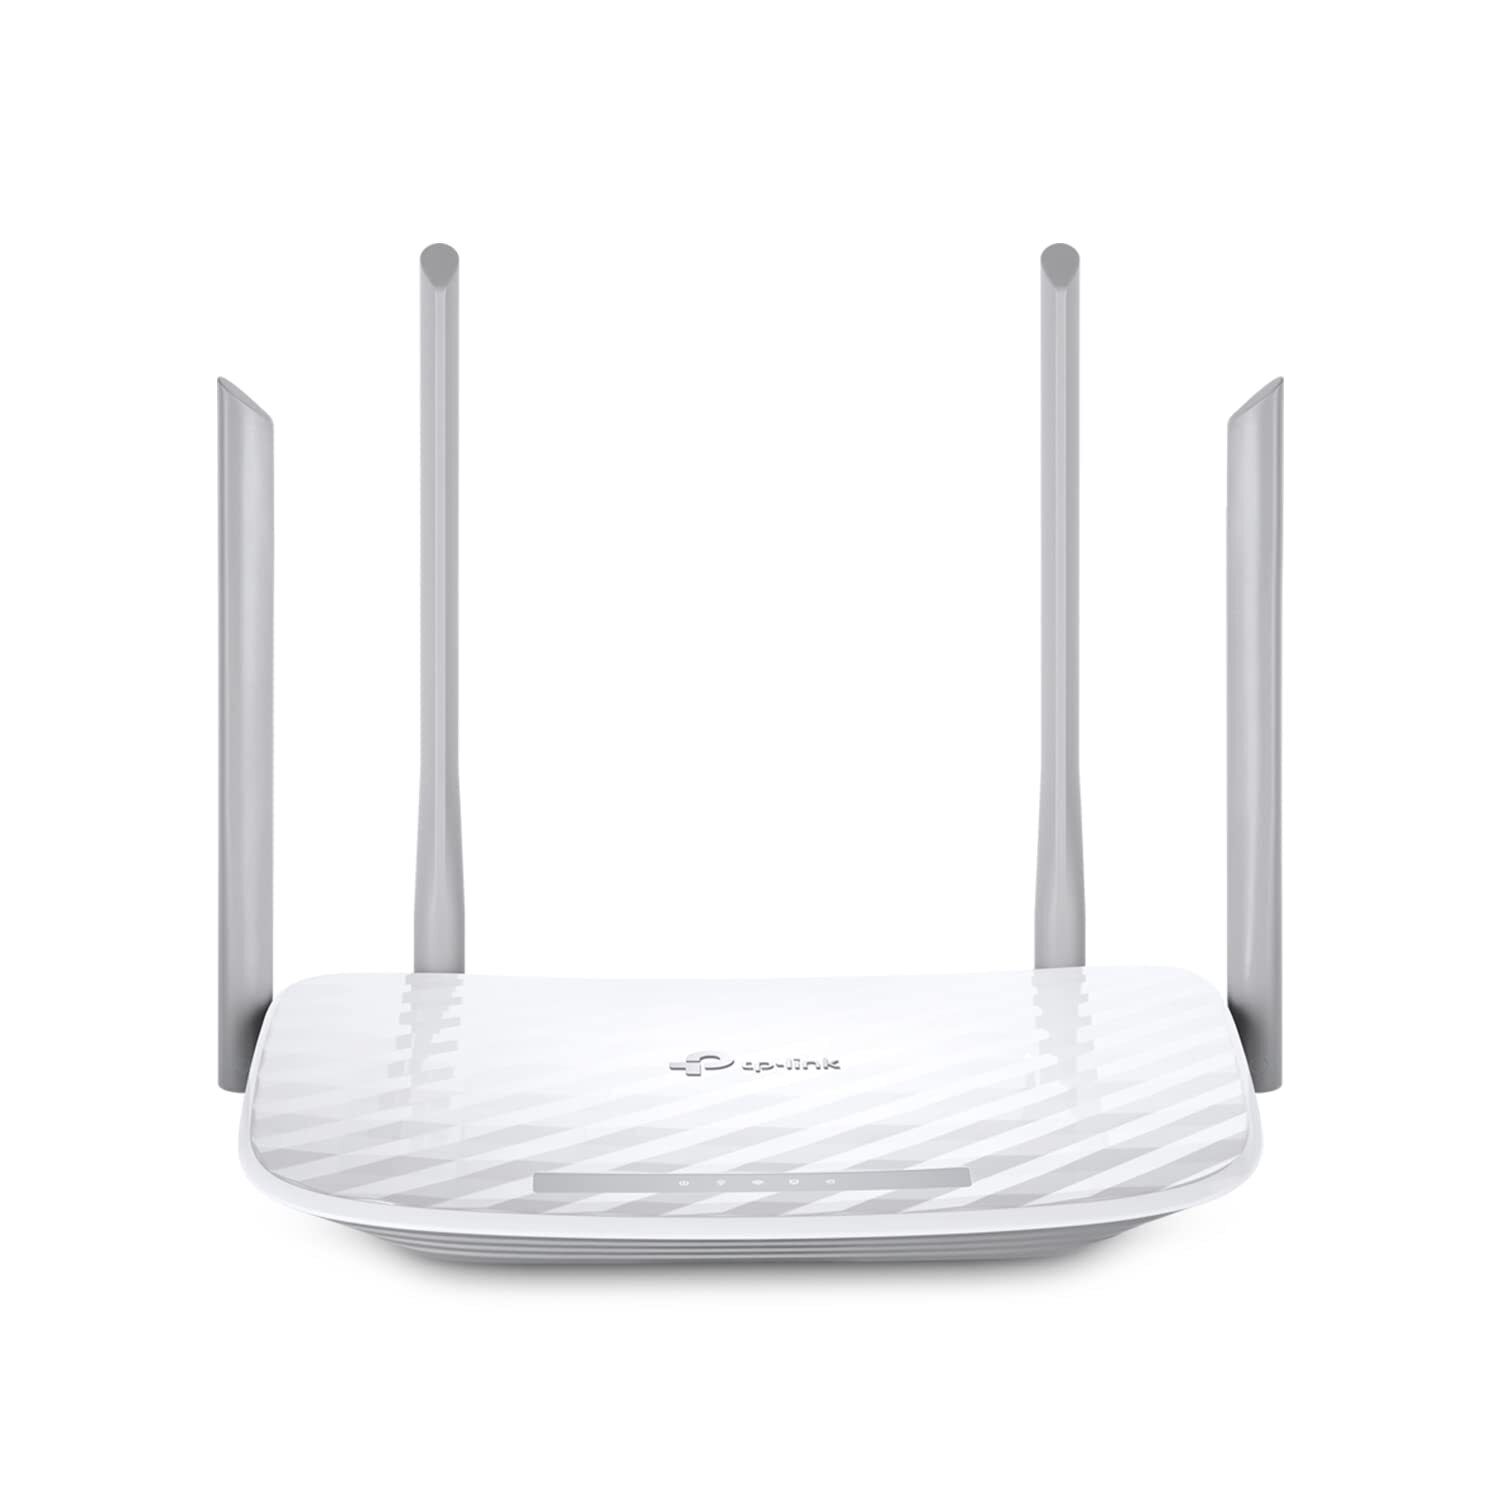 TP-Link AC1200 WiFi Router (Archer A54) - Dual Band Wireless Internet Router,